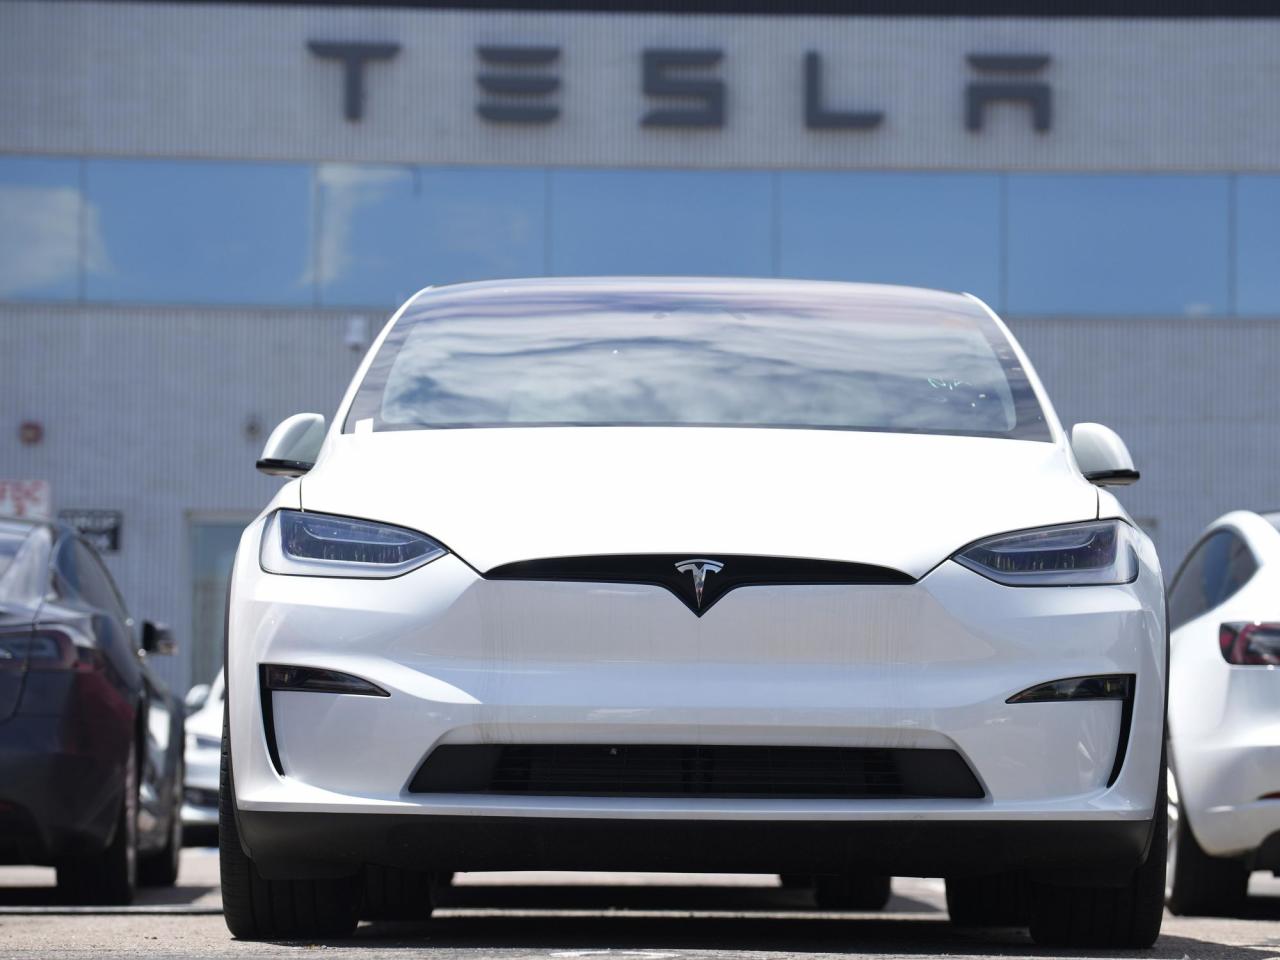 Tesla sales fall nearly 9% to start the year as competition heats up and demand for EVs slows